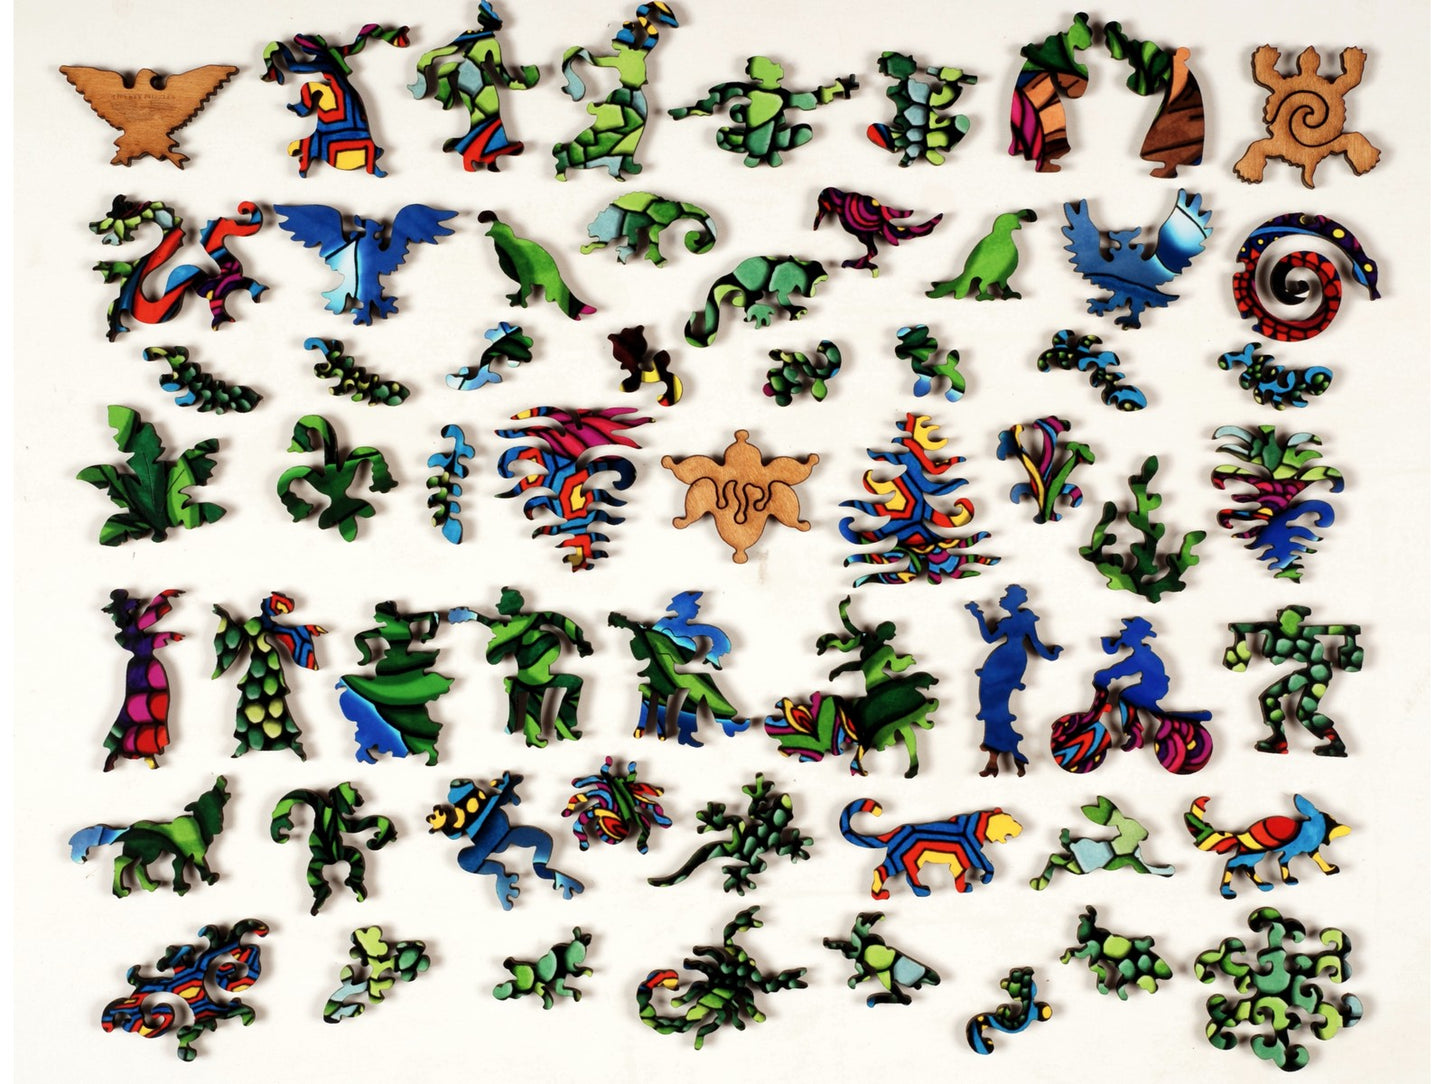 The whimsy pieces that can be found in the puzzle, Chameleon.